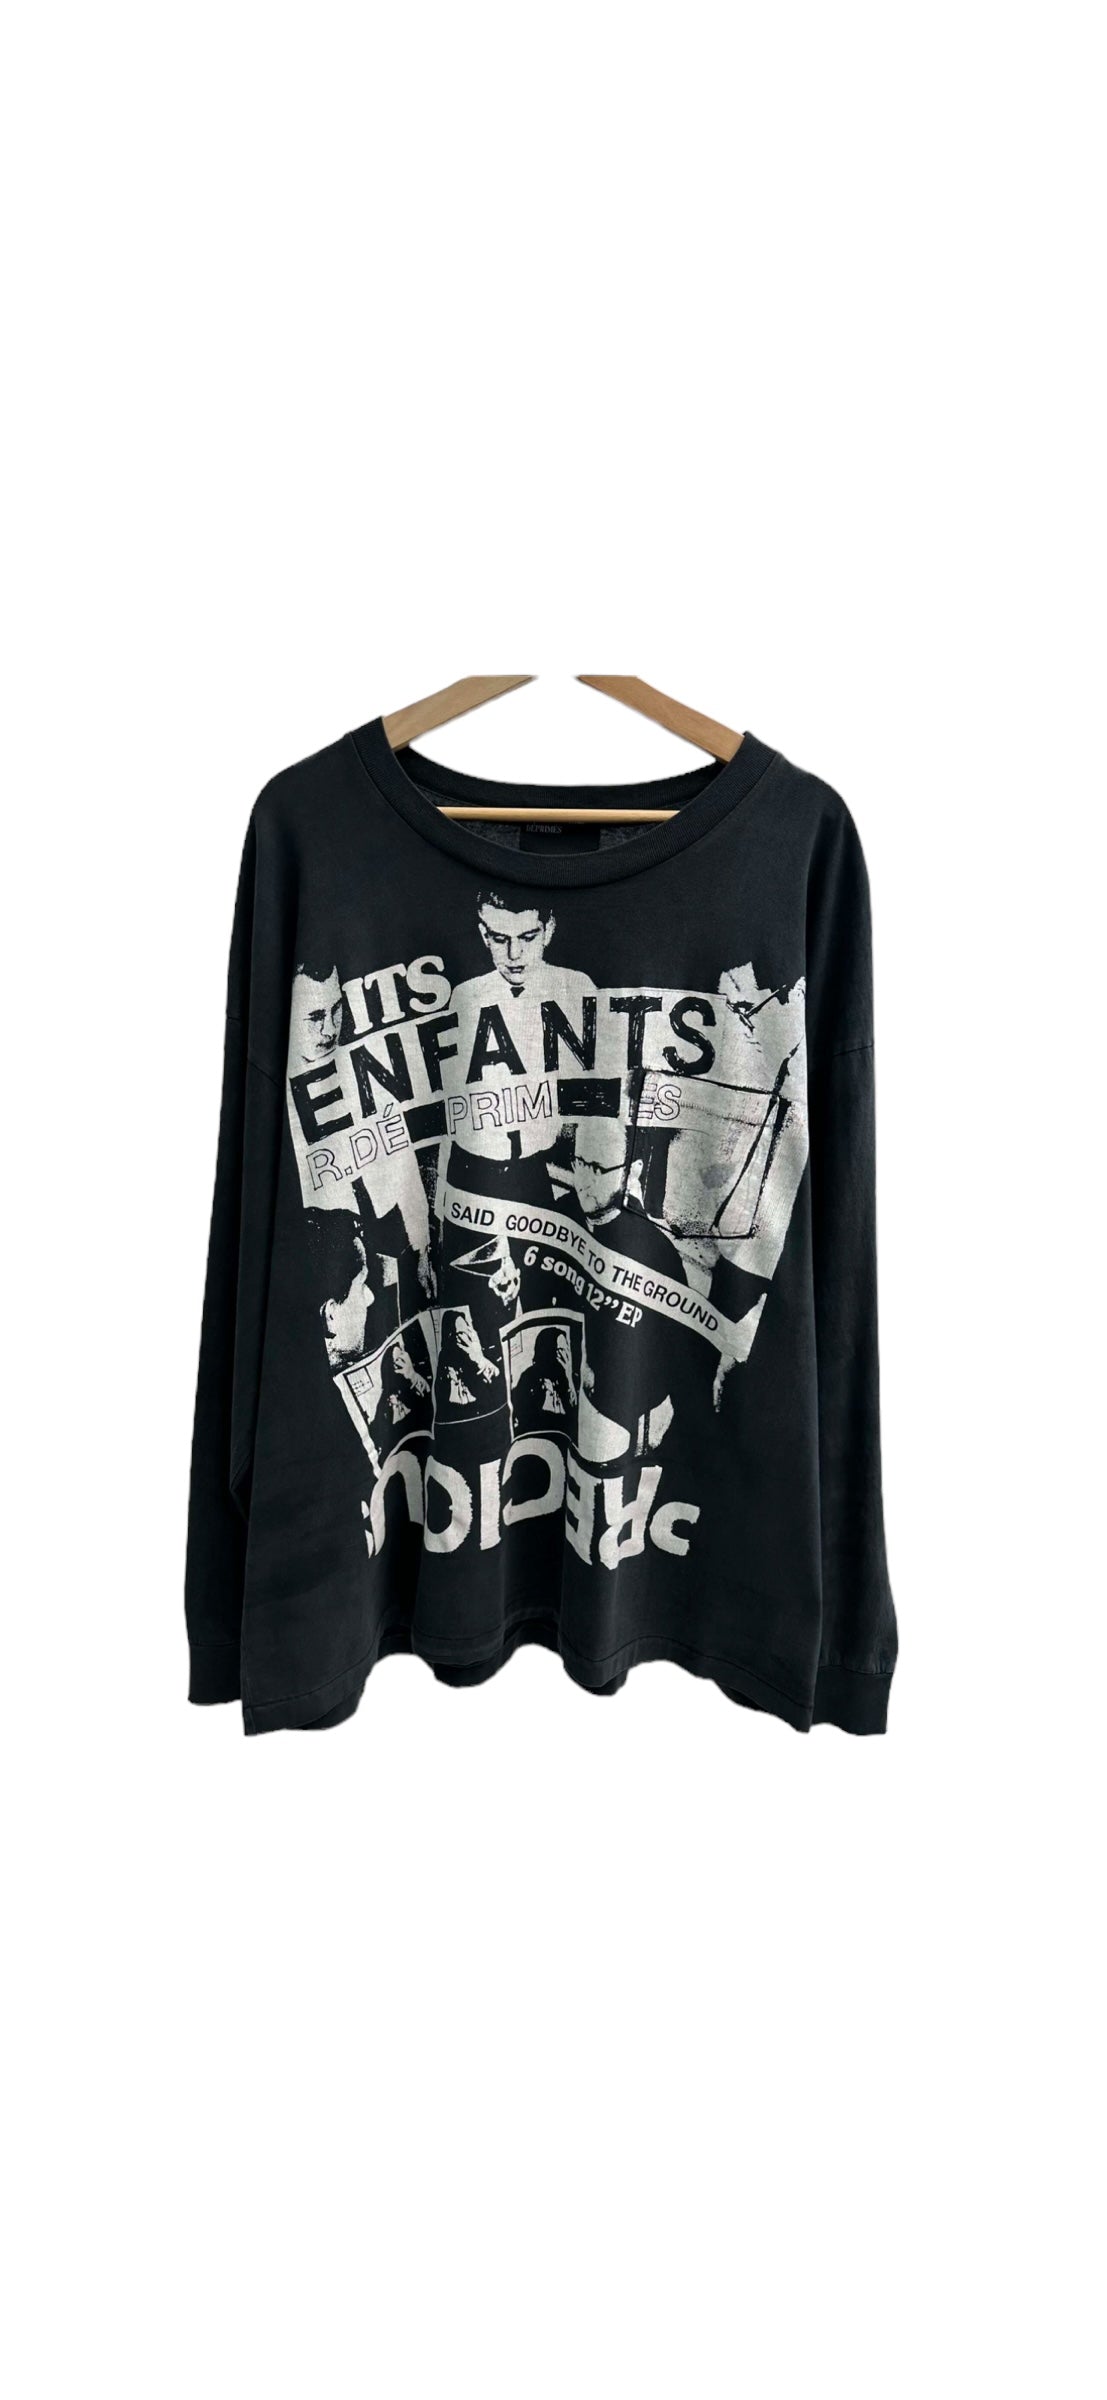 Enfants Riches Déprimés To Say Goodbye To The Ground Long Sleeve